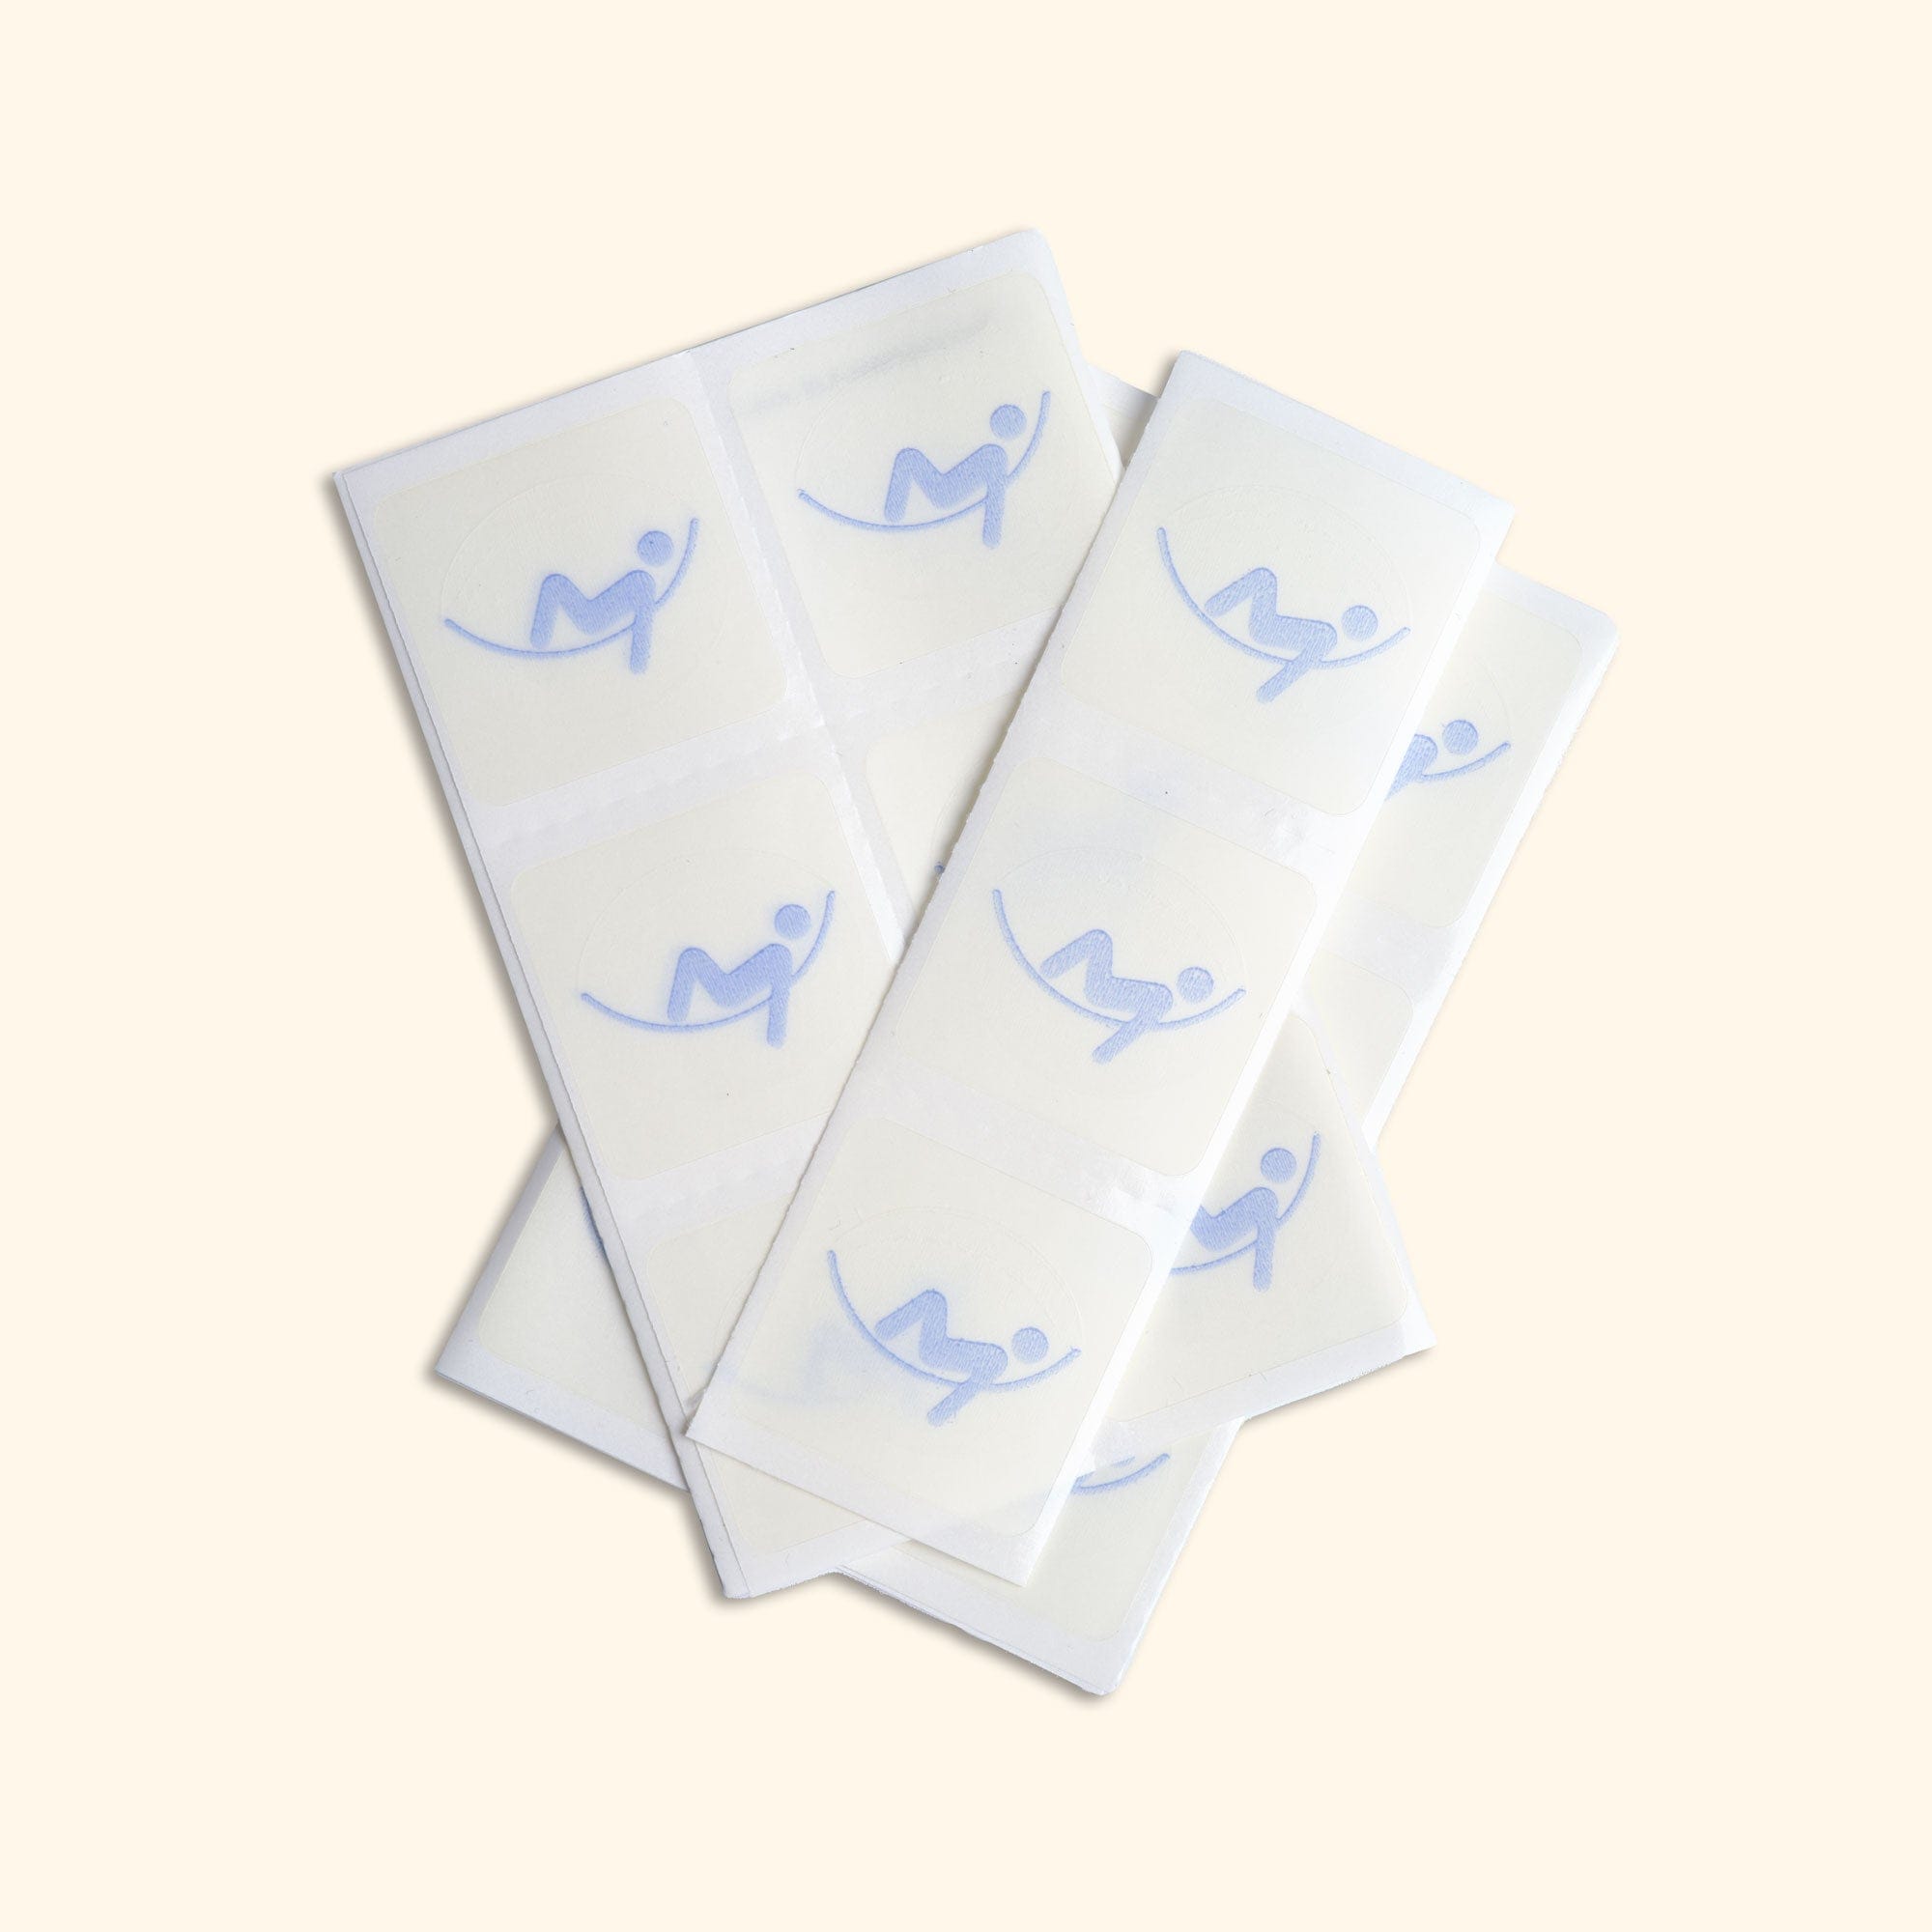 A pack of 30 sleep patches